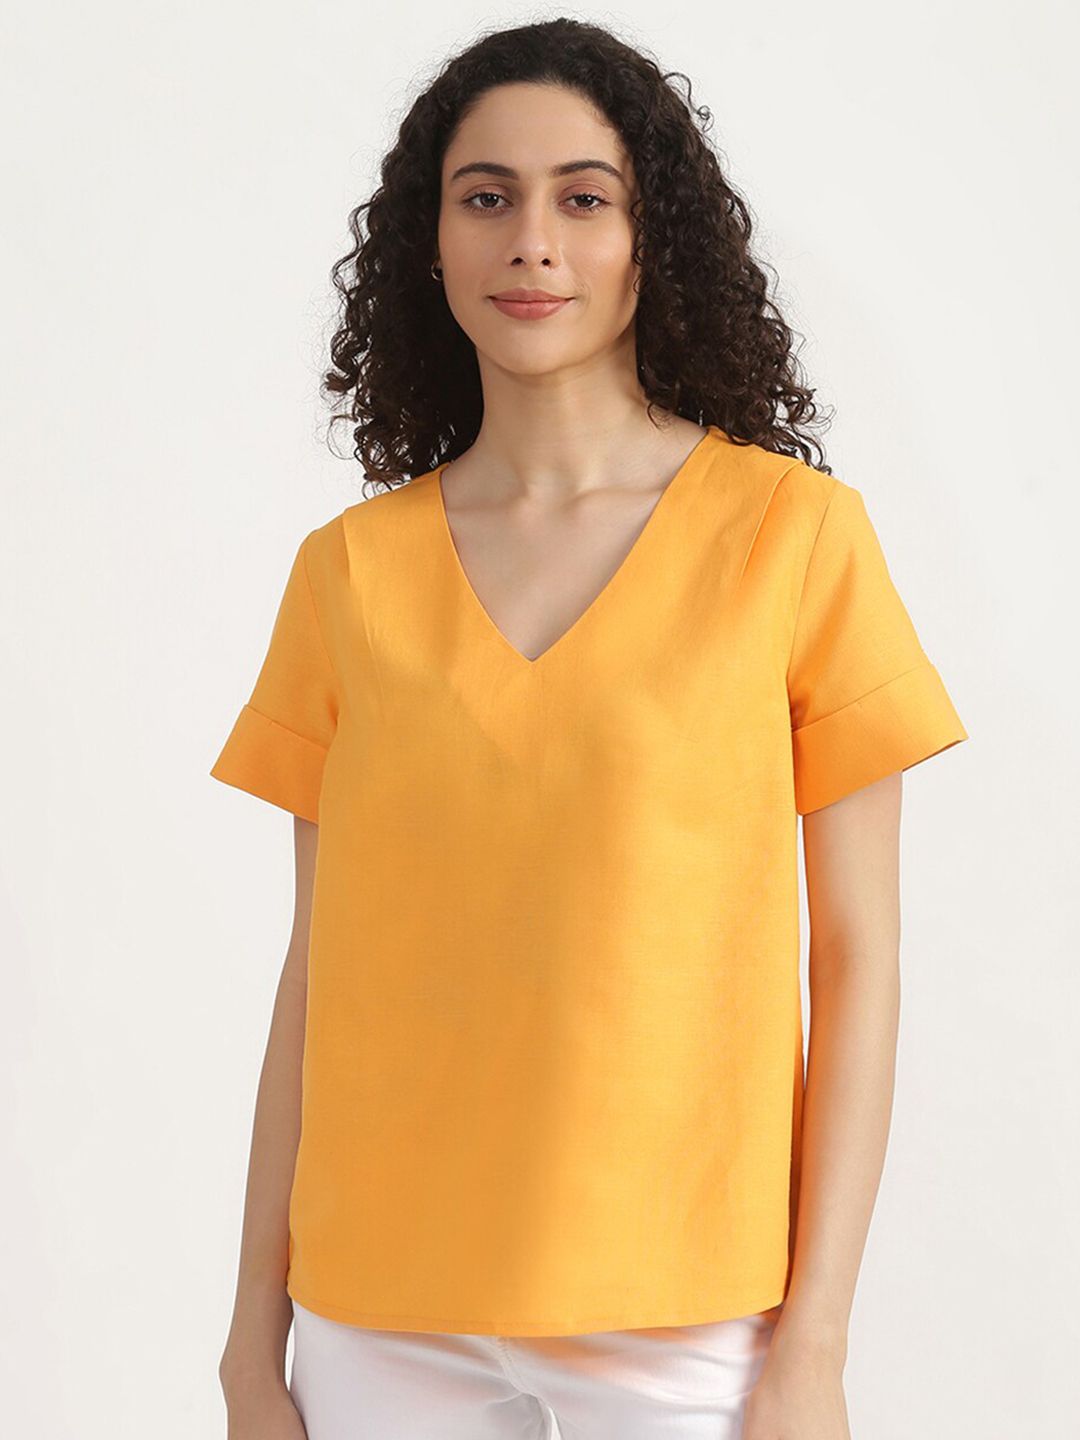 United Colors of Benetton Women Yellow Solid Top Price in India